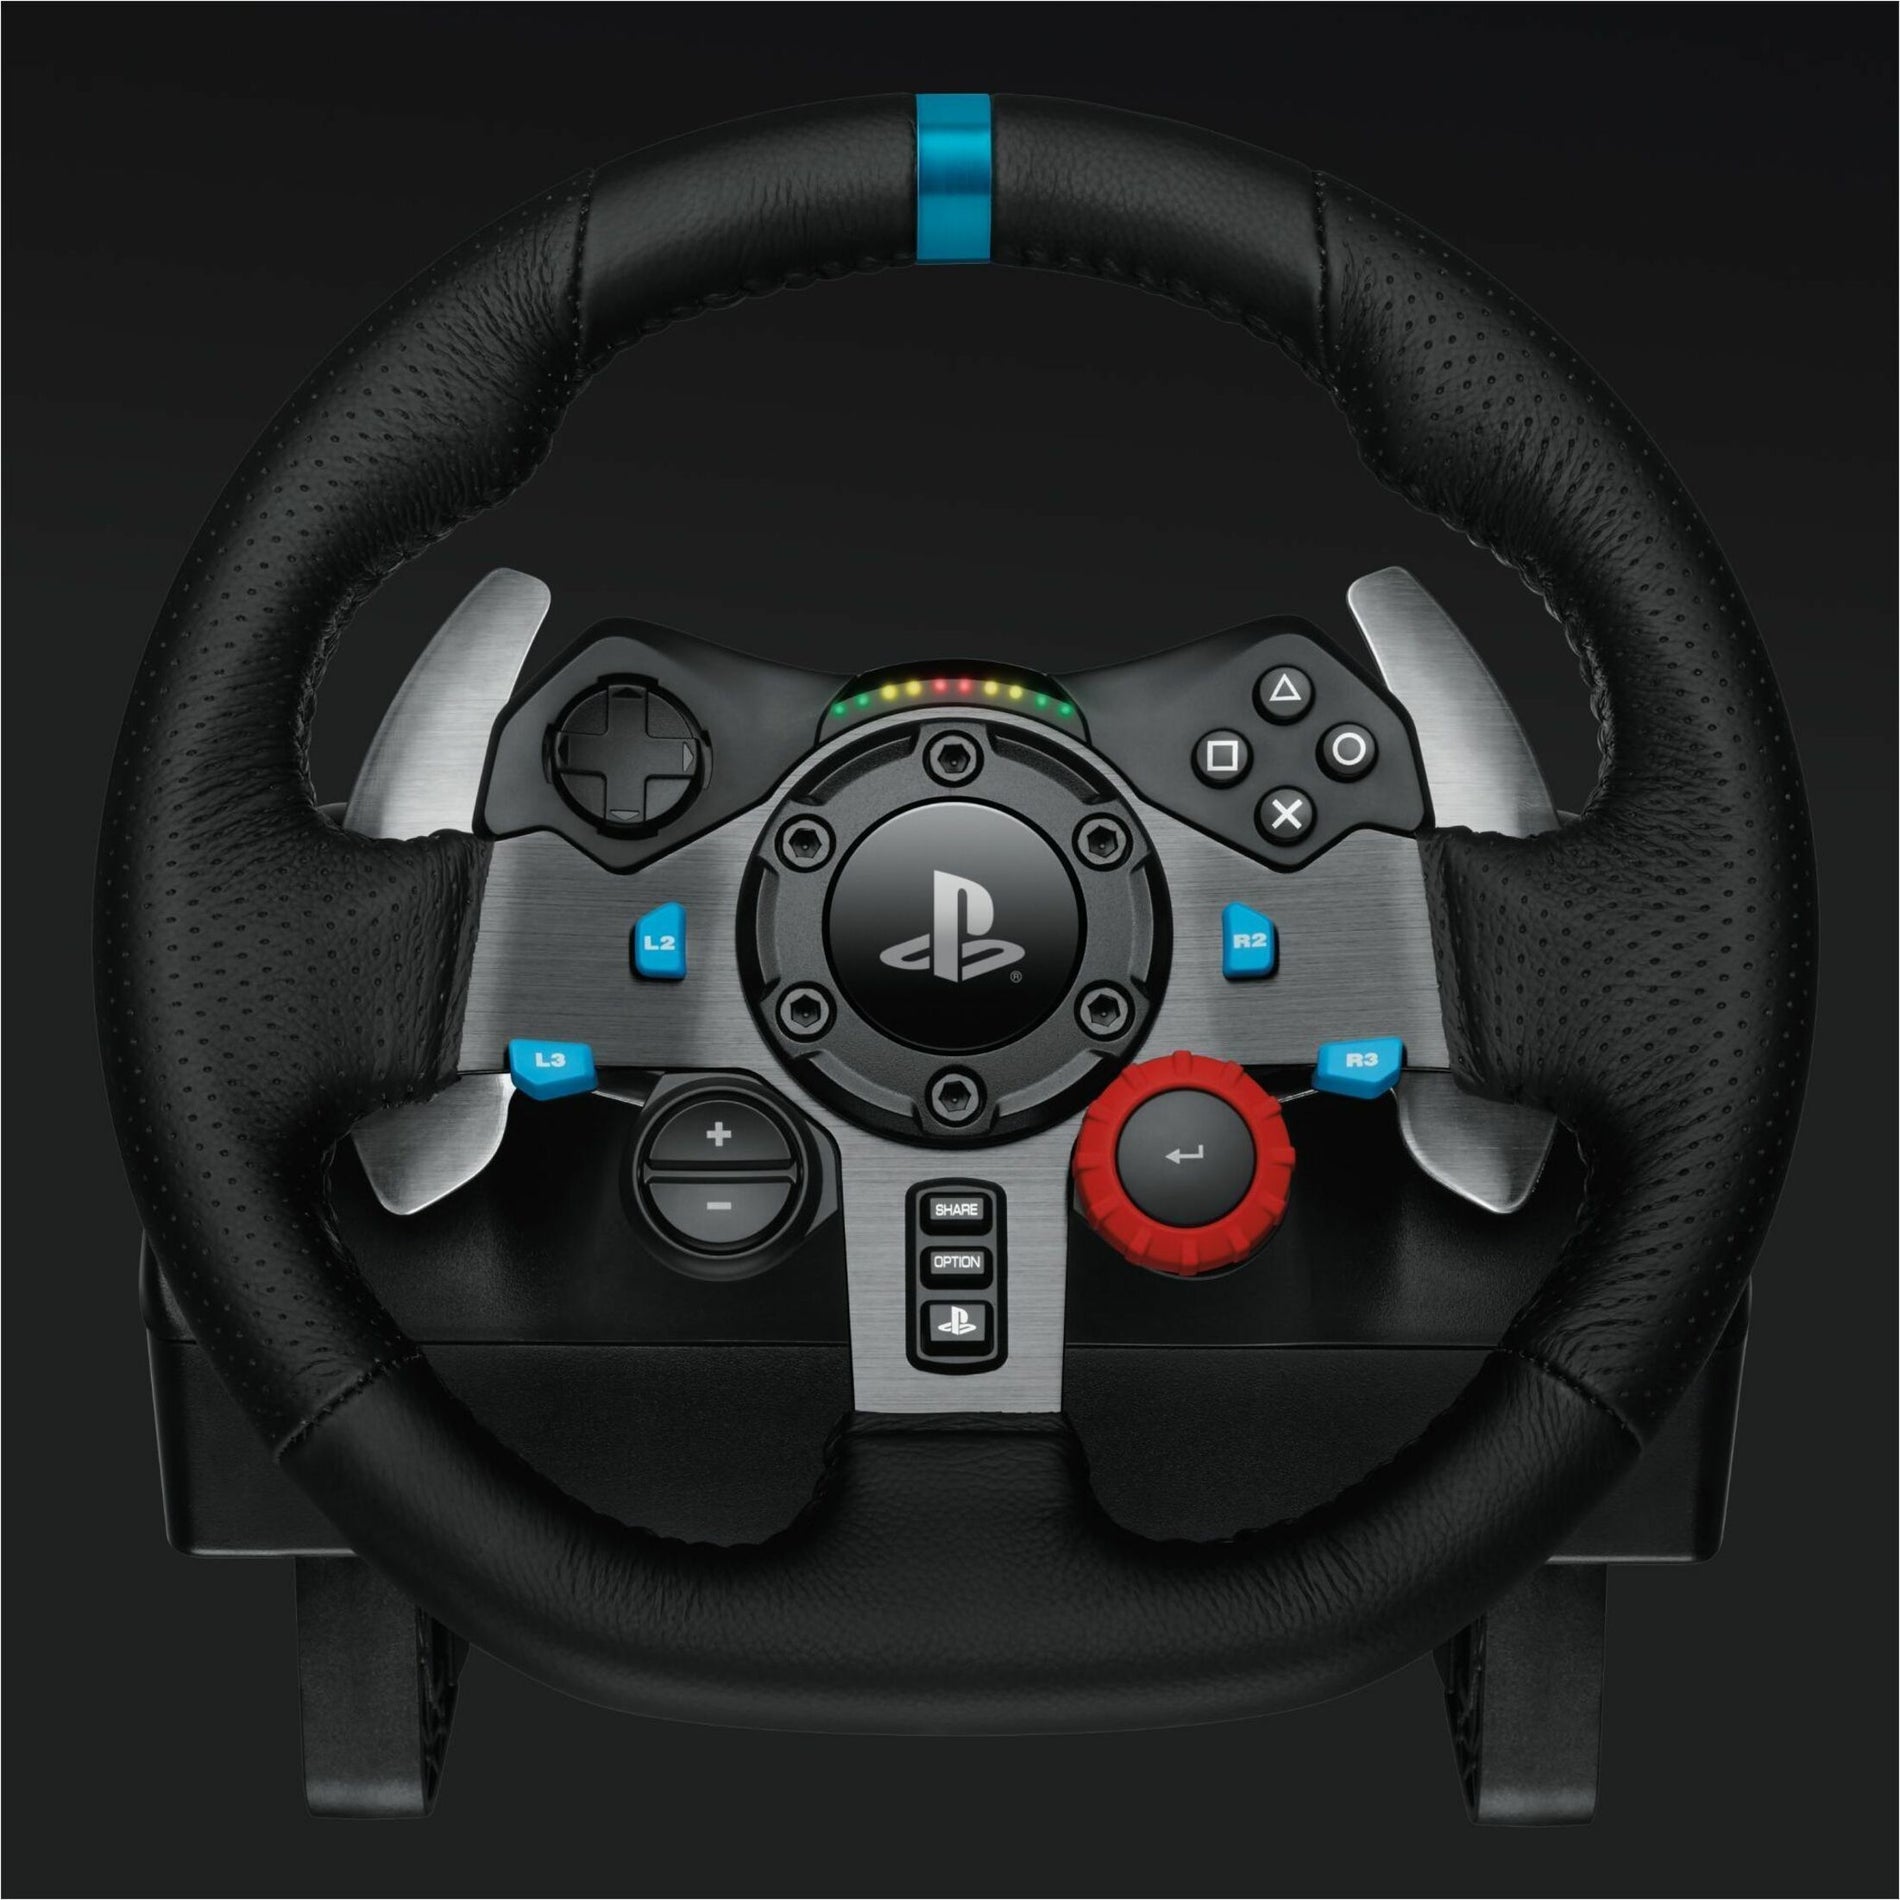 Logitech 941-000110 G29 Racing Wheel for PlayStation and PC, LED Indicator, Force Feedback